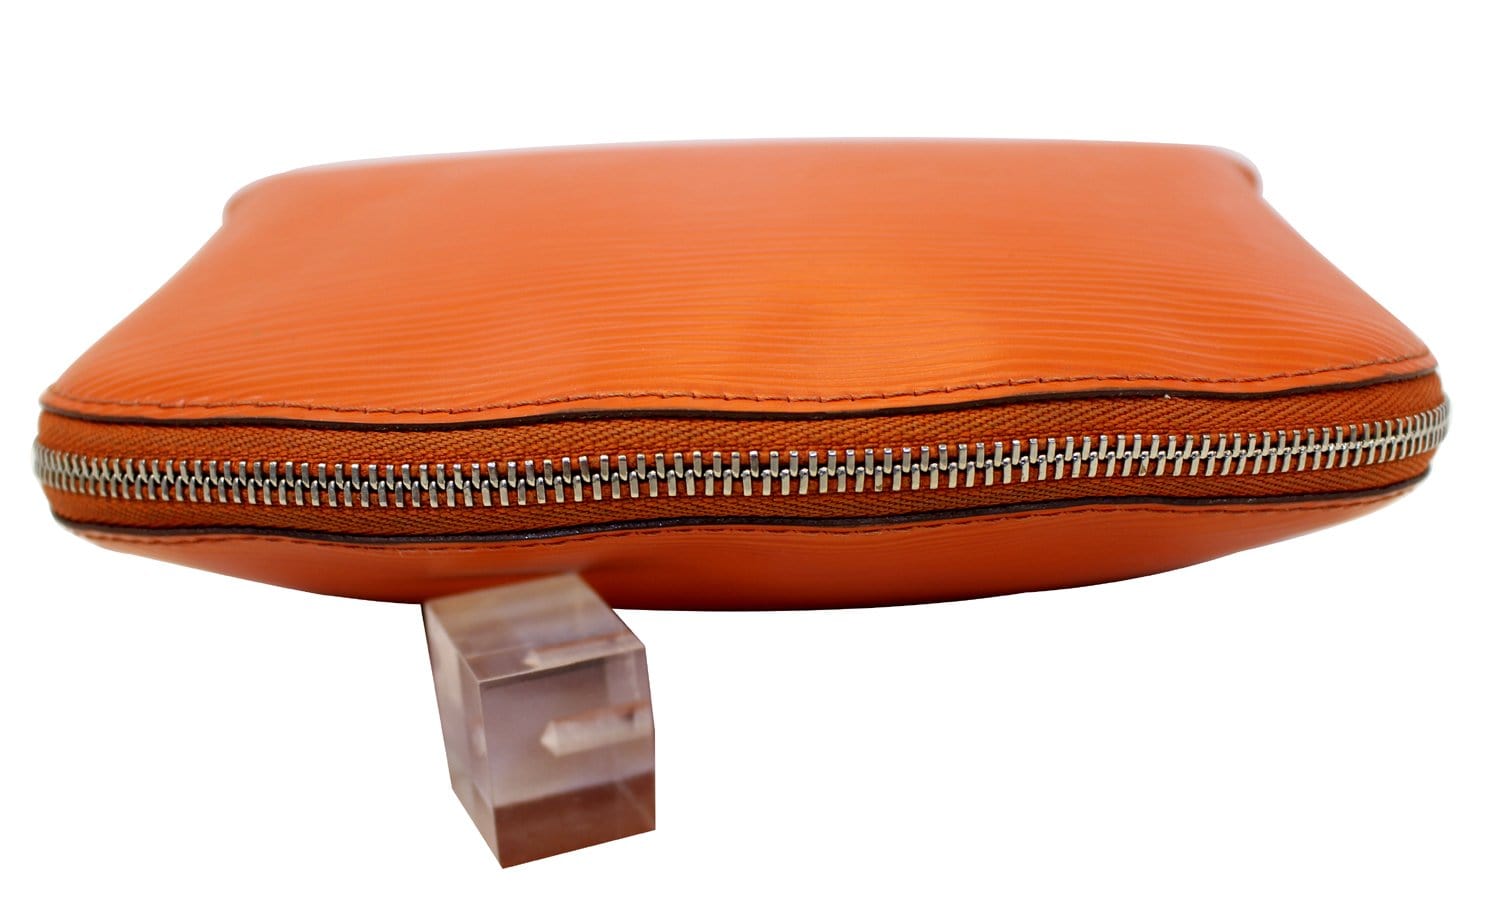 Sold at Auction: Fiocchi Italy Epi Leather Orange Pouch Bag